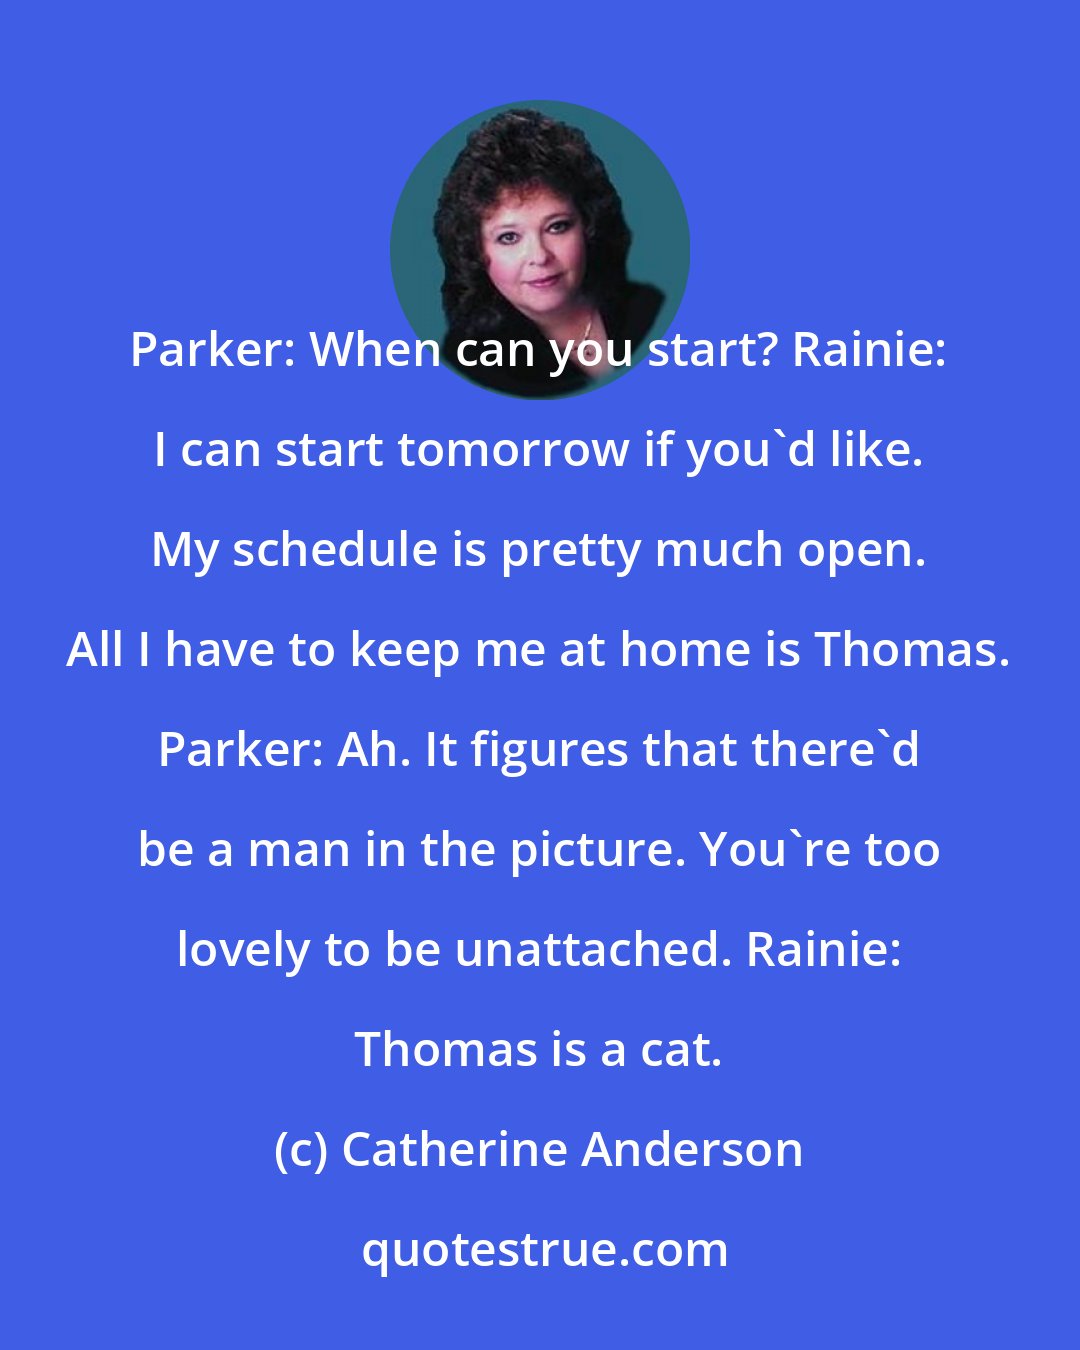 Catherine Anderson: Parker: When can you start? Rainie: I can start tomorrow if you'd like. My schedule is pretty much open. All I have to keep me at home is Thomas. Parker: Ah. It figures that there'd be a man in the picture. You're too lovely to be unattached. Rainie: Thomas is a cat.